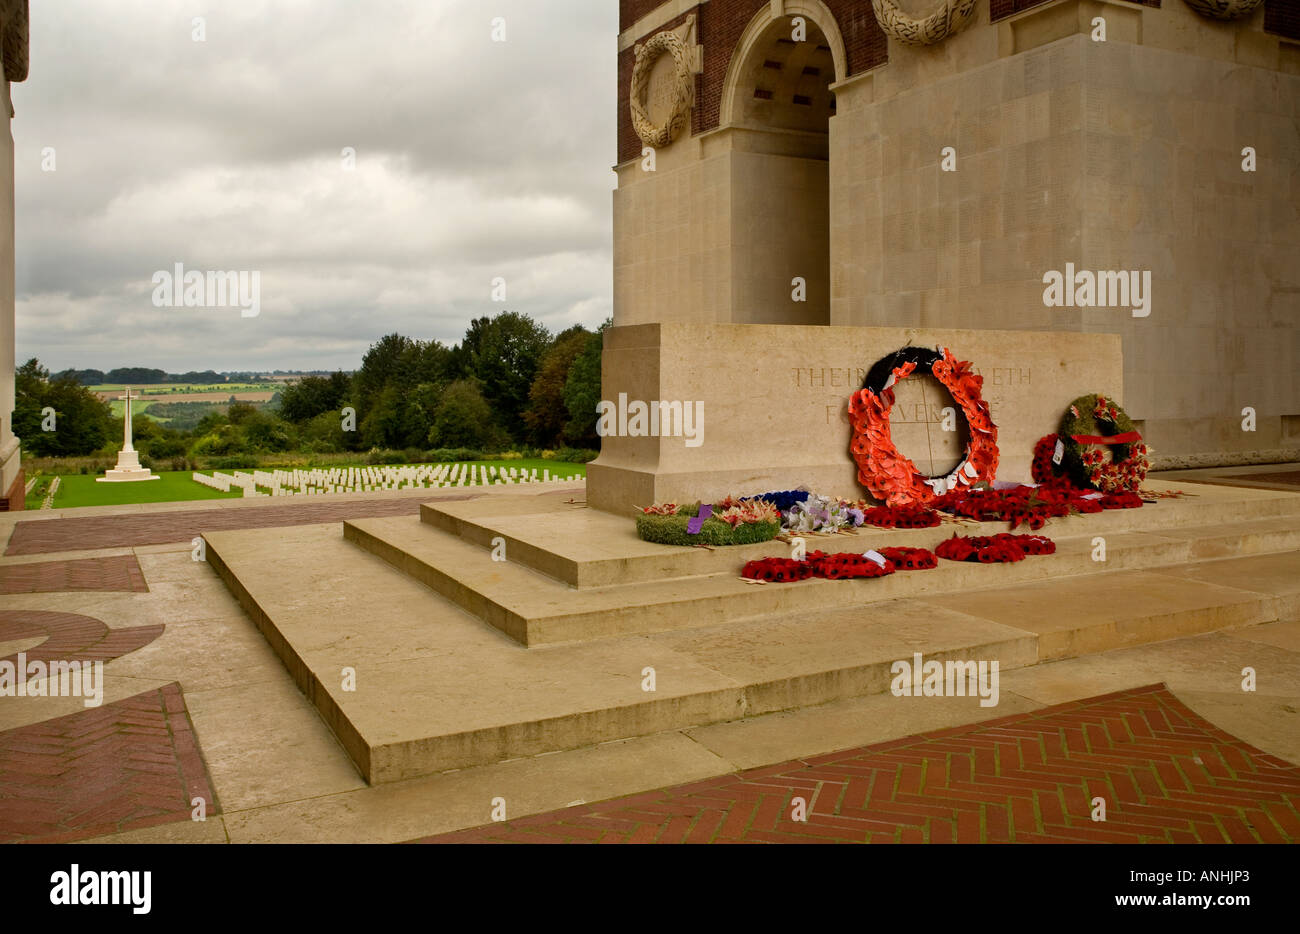 The Thiepval memorial to the 73,000 men with no grave who died in WW1 on the Somme in France Stock Photo